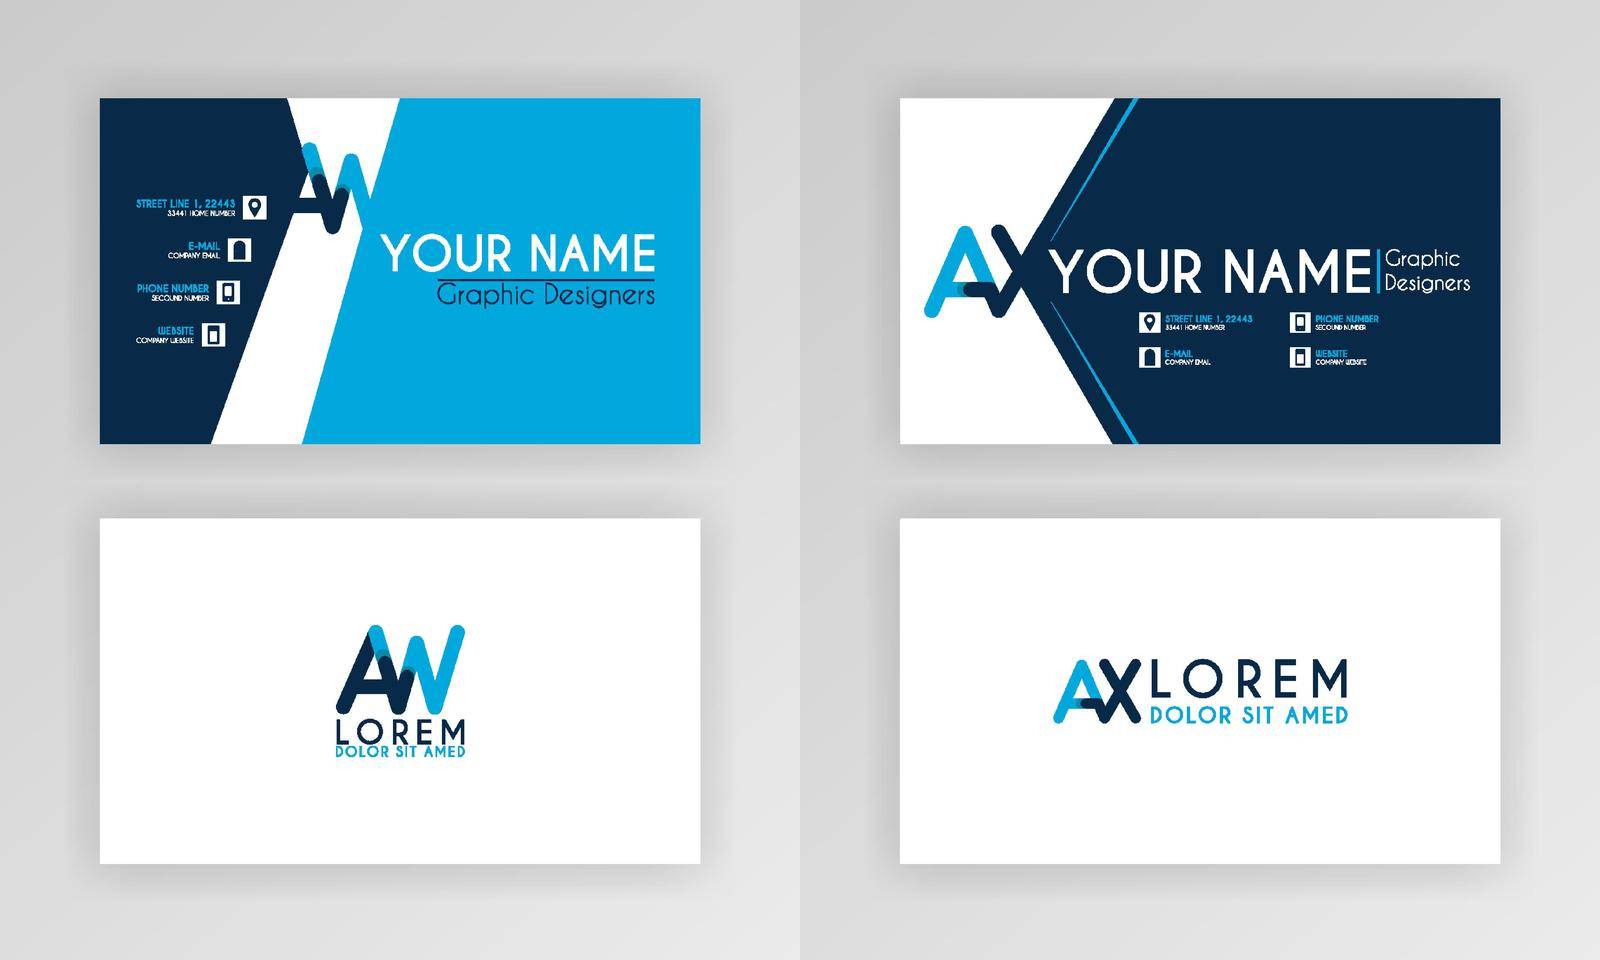 Blue Business Card Template. Simple Identity Card Design With Alphabet Logo And Slash Accent Decoration. For Corporate, Company, Professional, Business, Advertising, Public Relations, Brochure, Poster by yayimage